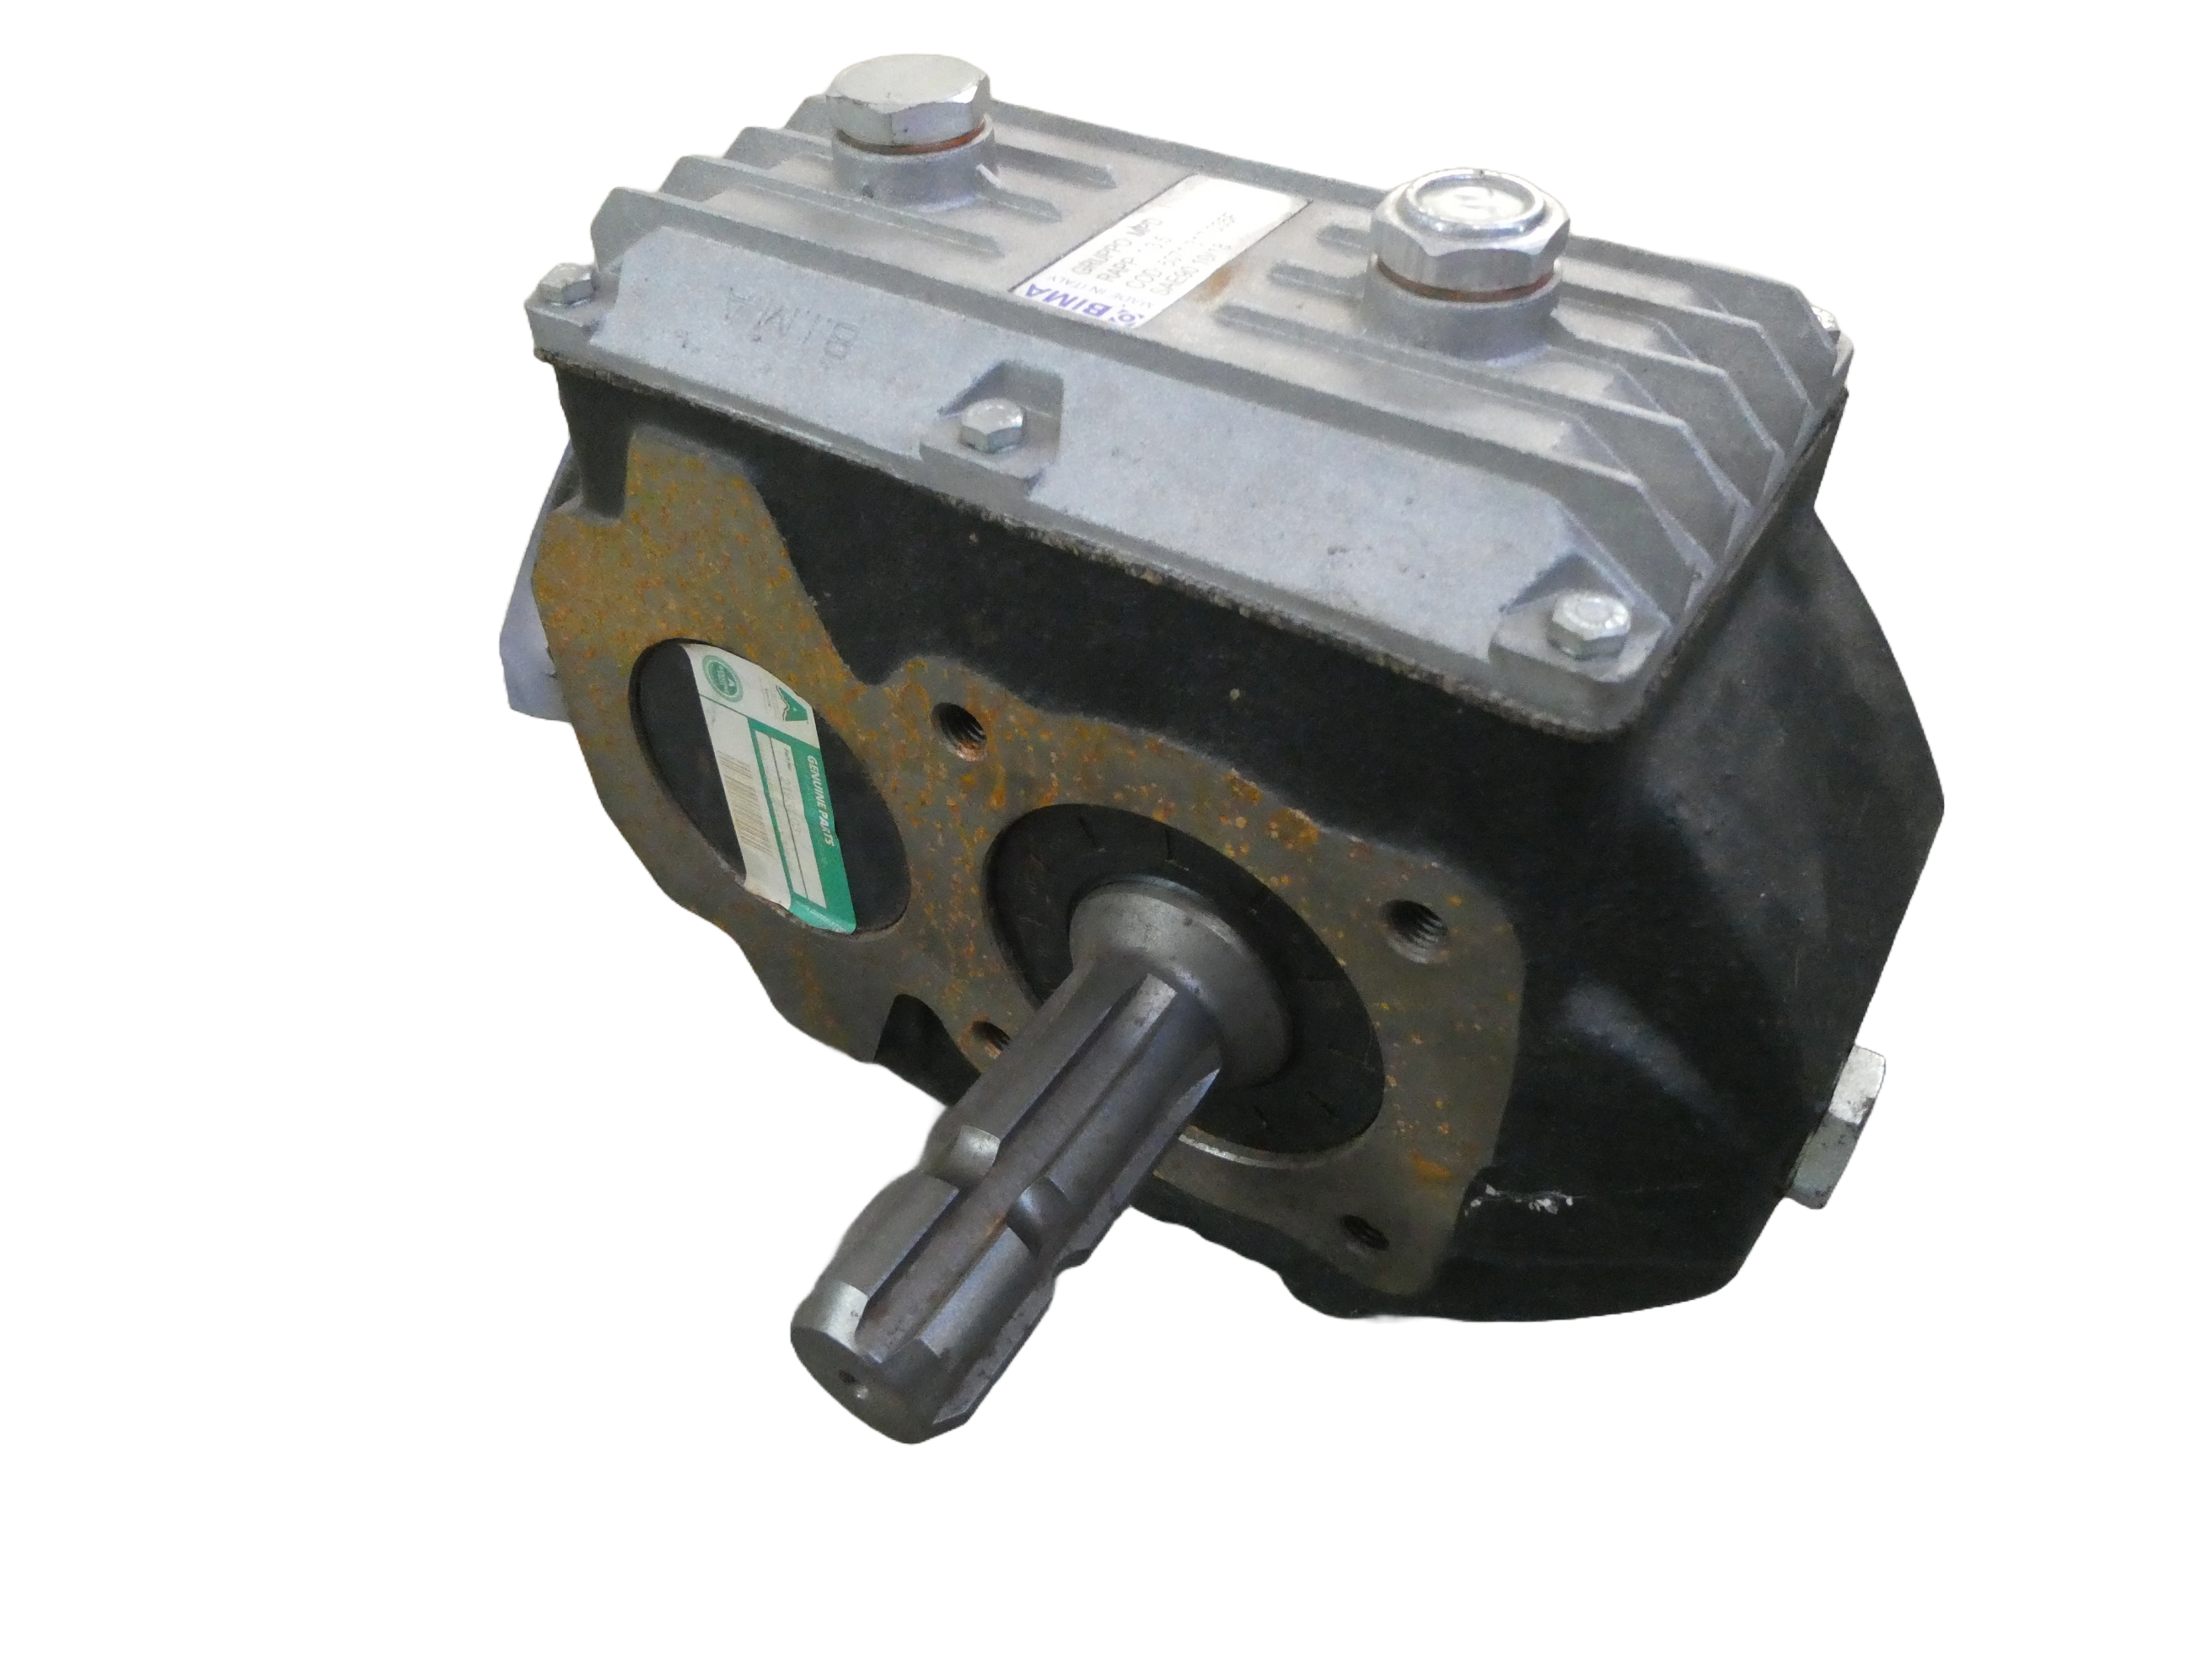 Twose Hedgecutter Gearboxes